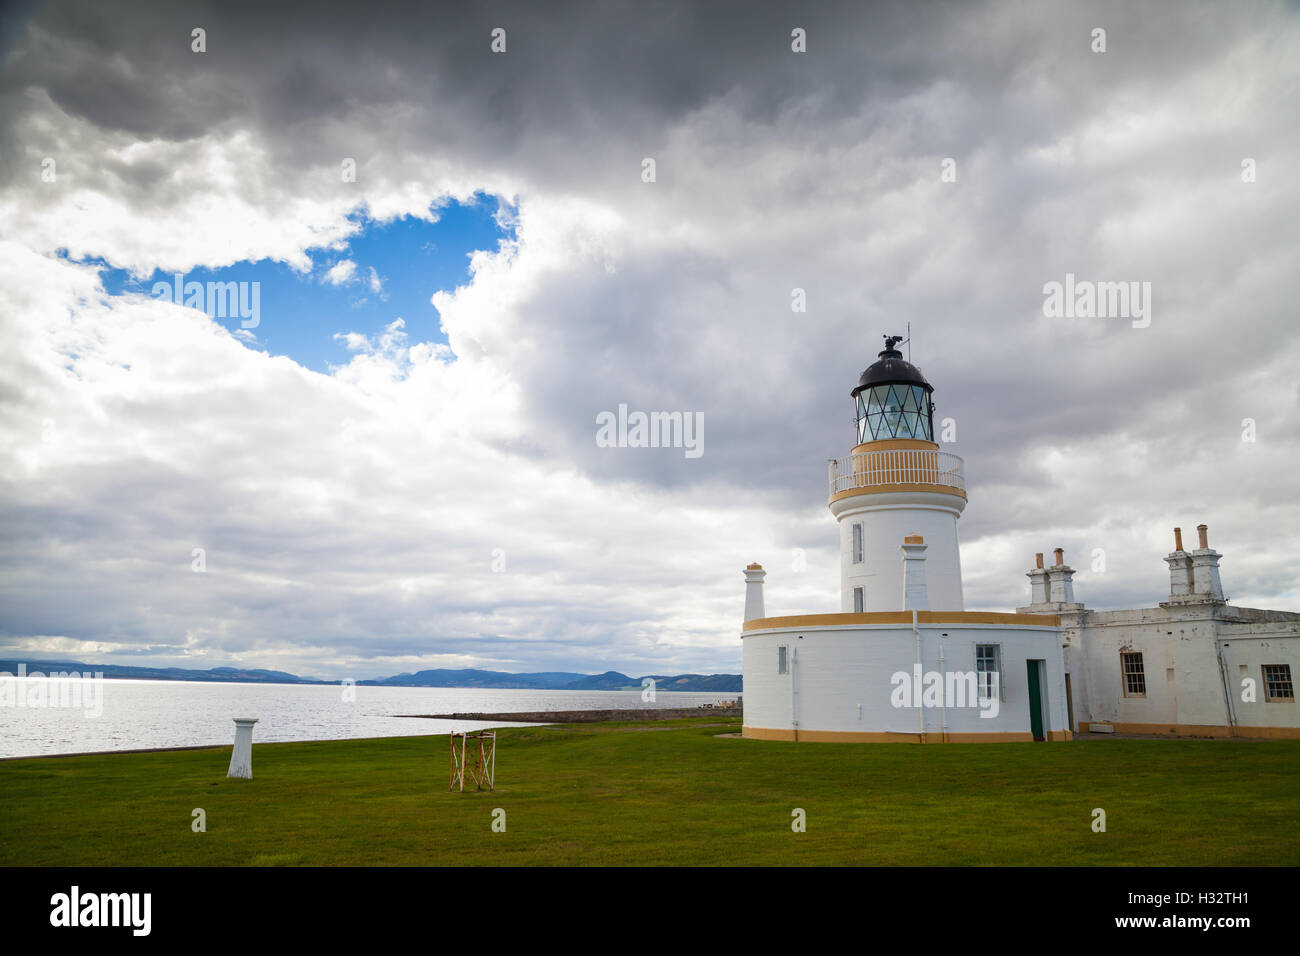 The Lighthouse at Chanonry Point on the Moray Firth, Scotland. Stock Photo